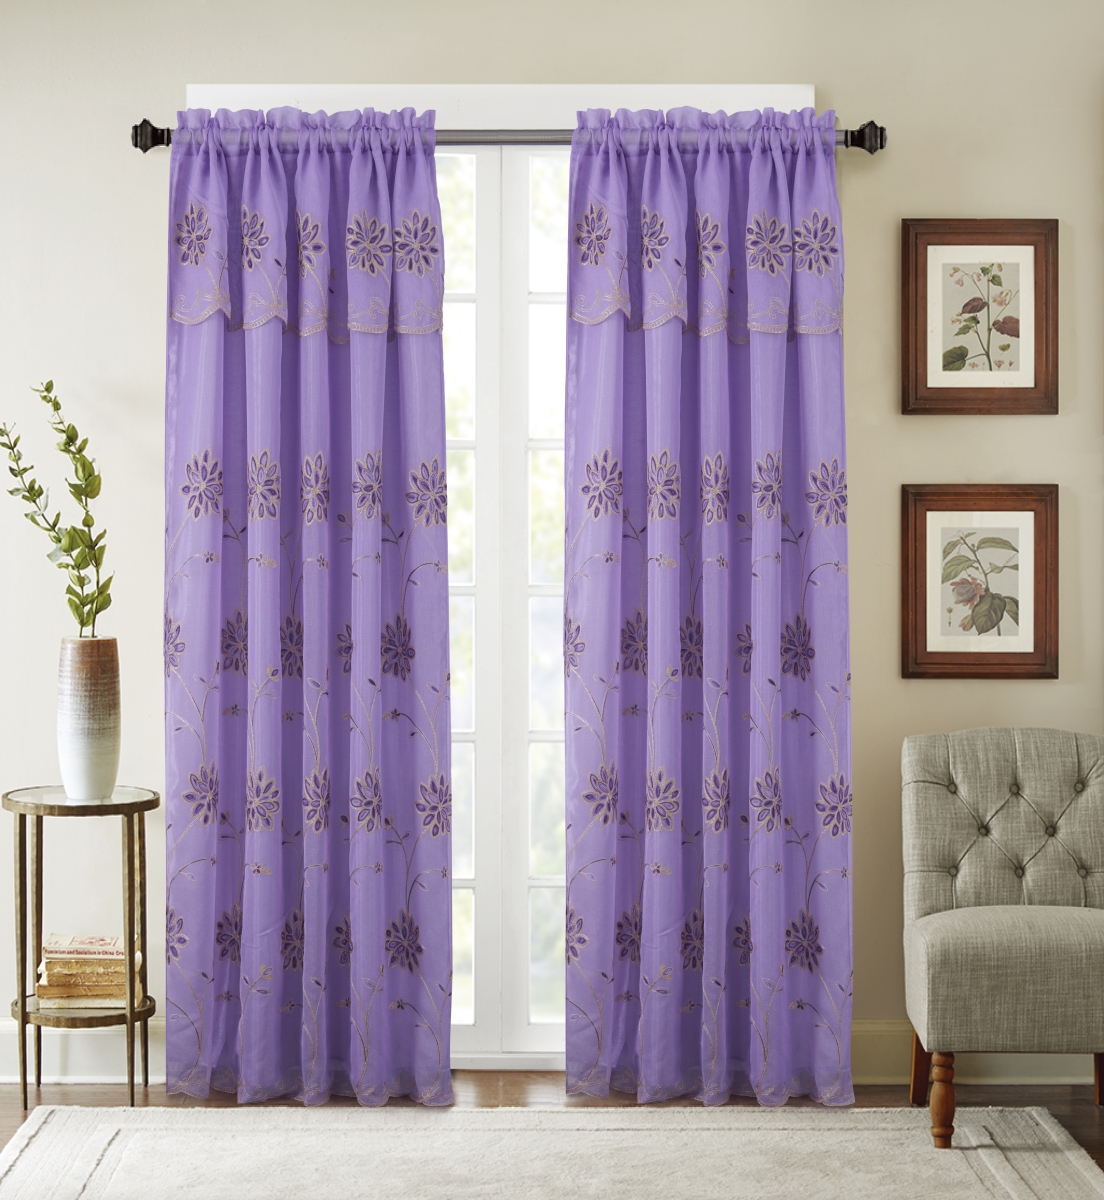 Pnc23546 54 X 84 In. Carter Floral Embroidered Single Rod Pocket Curtain Panel With Attached Valance, Lilac